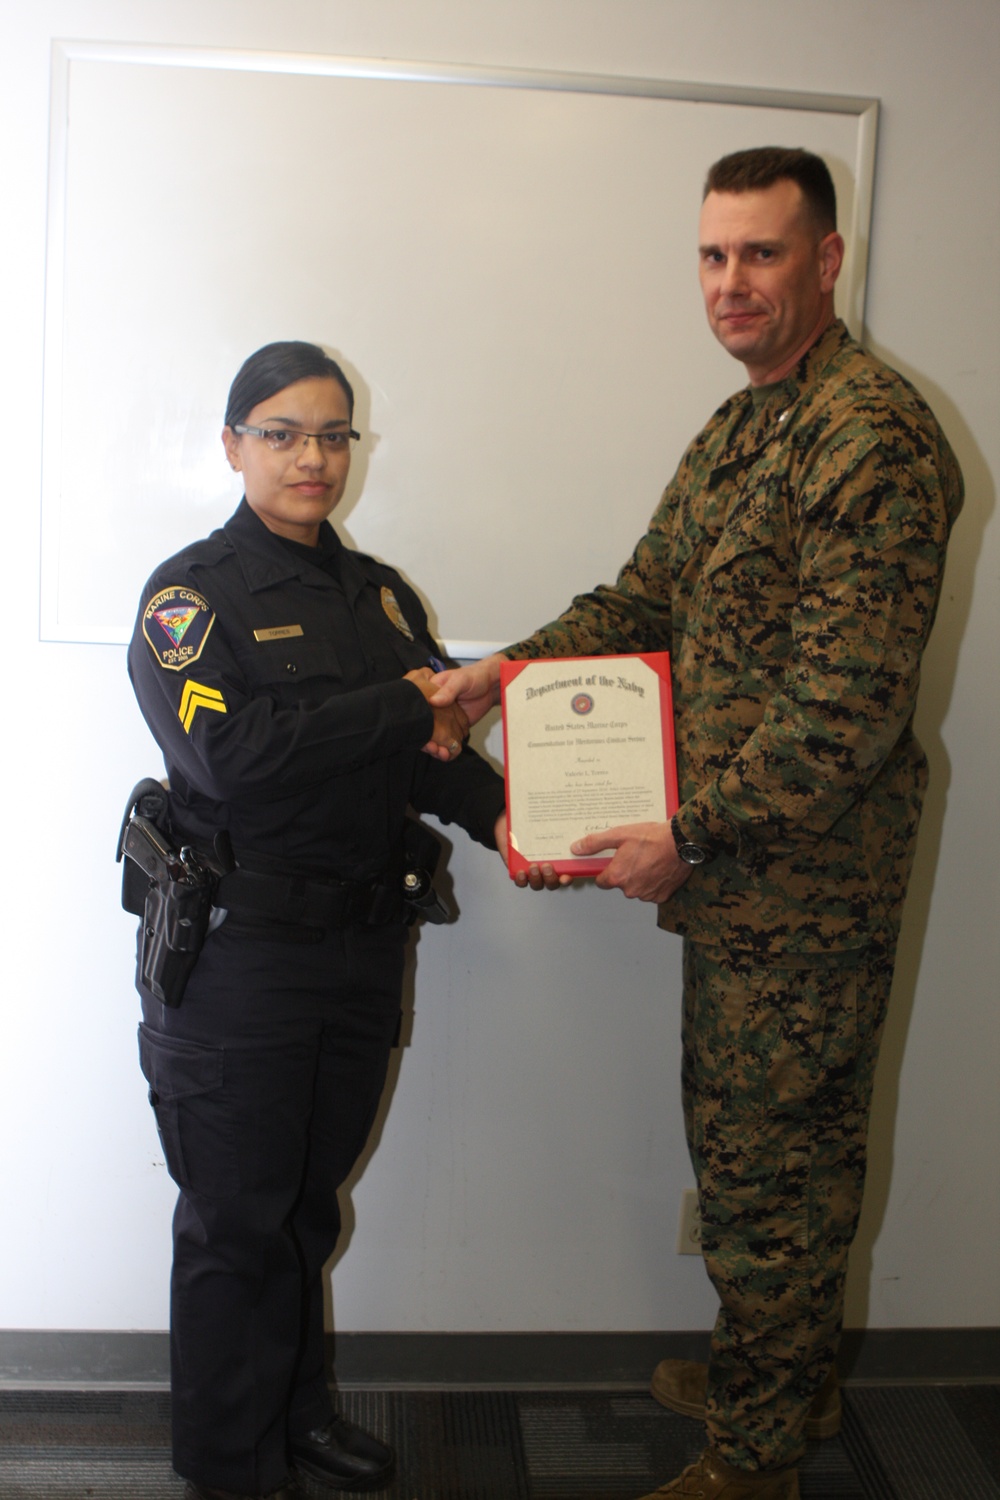 Corporal recognized for life-saving skills